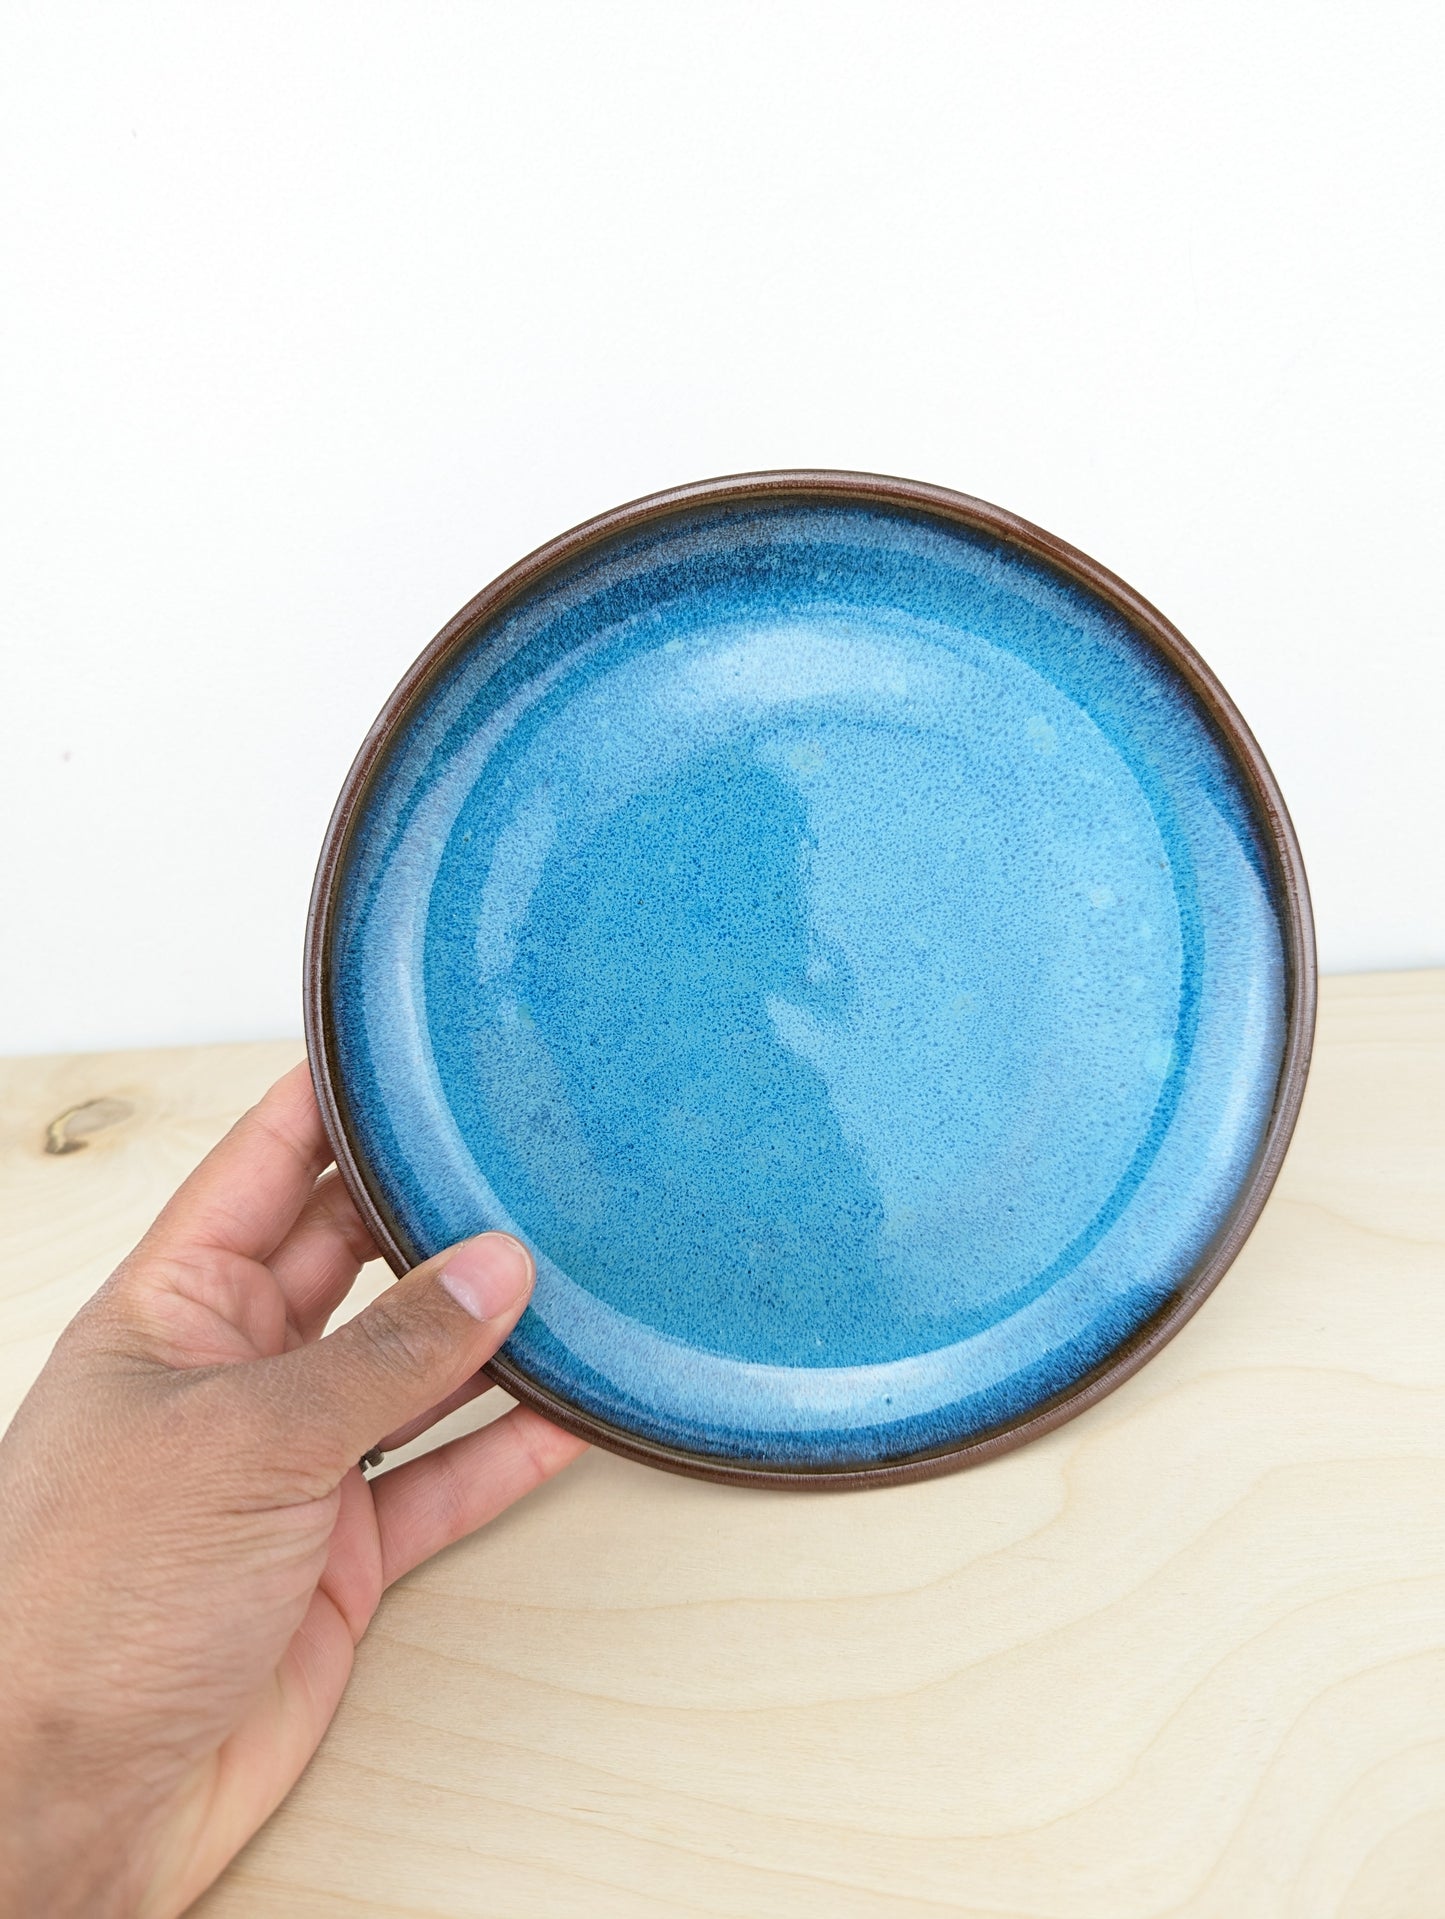 Red and Blue Plate